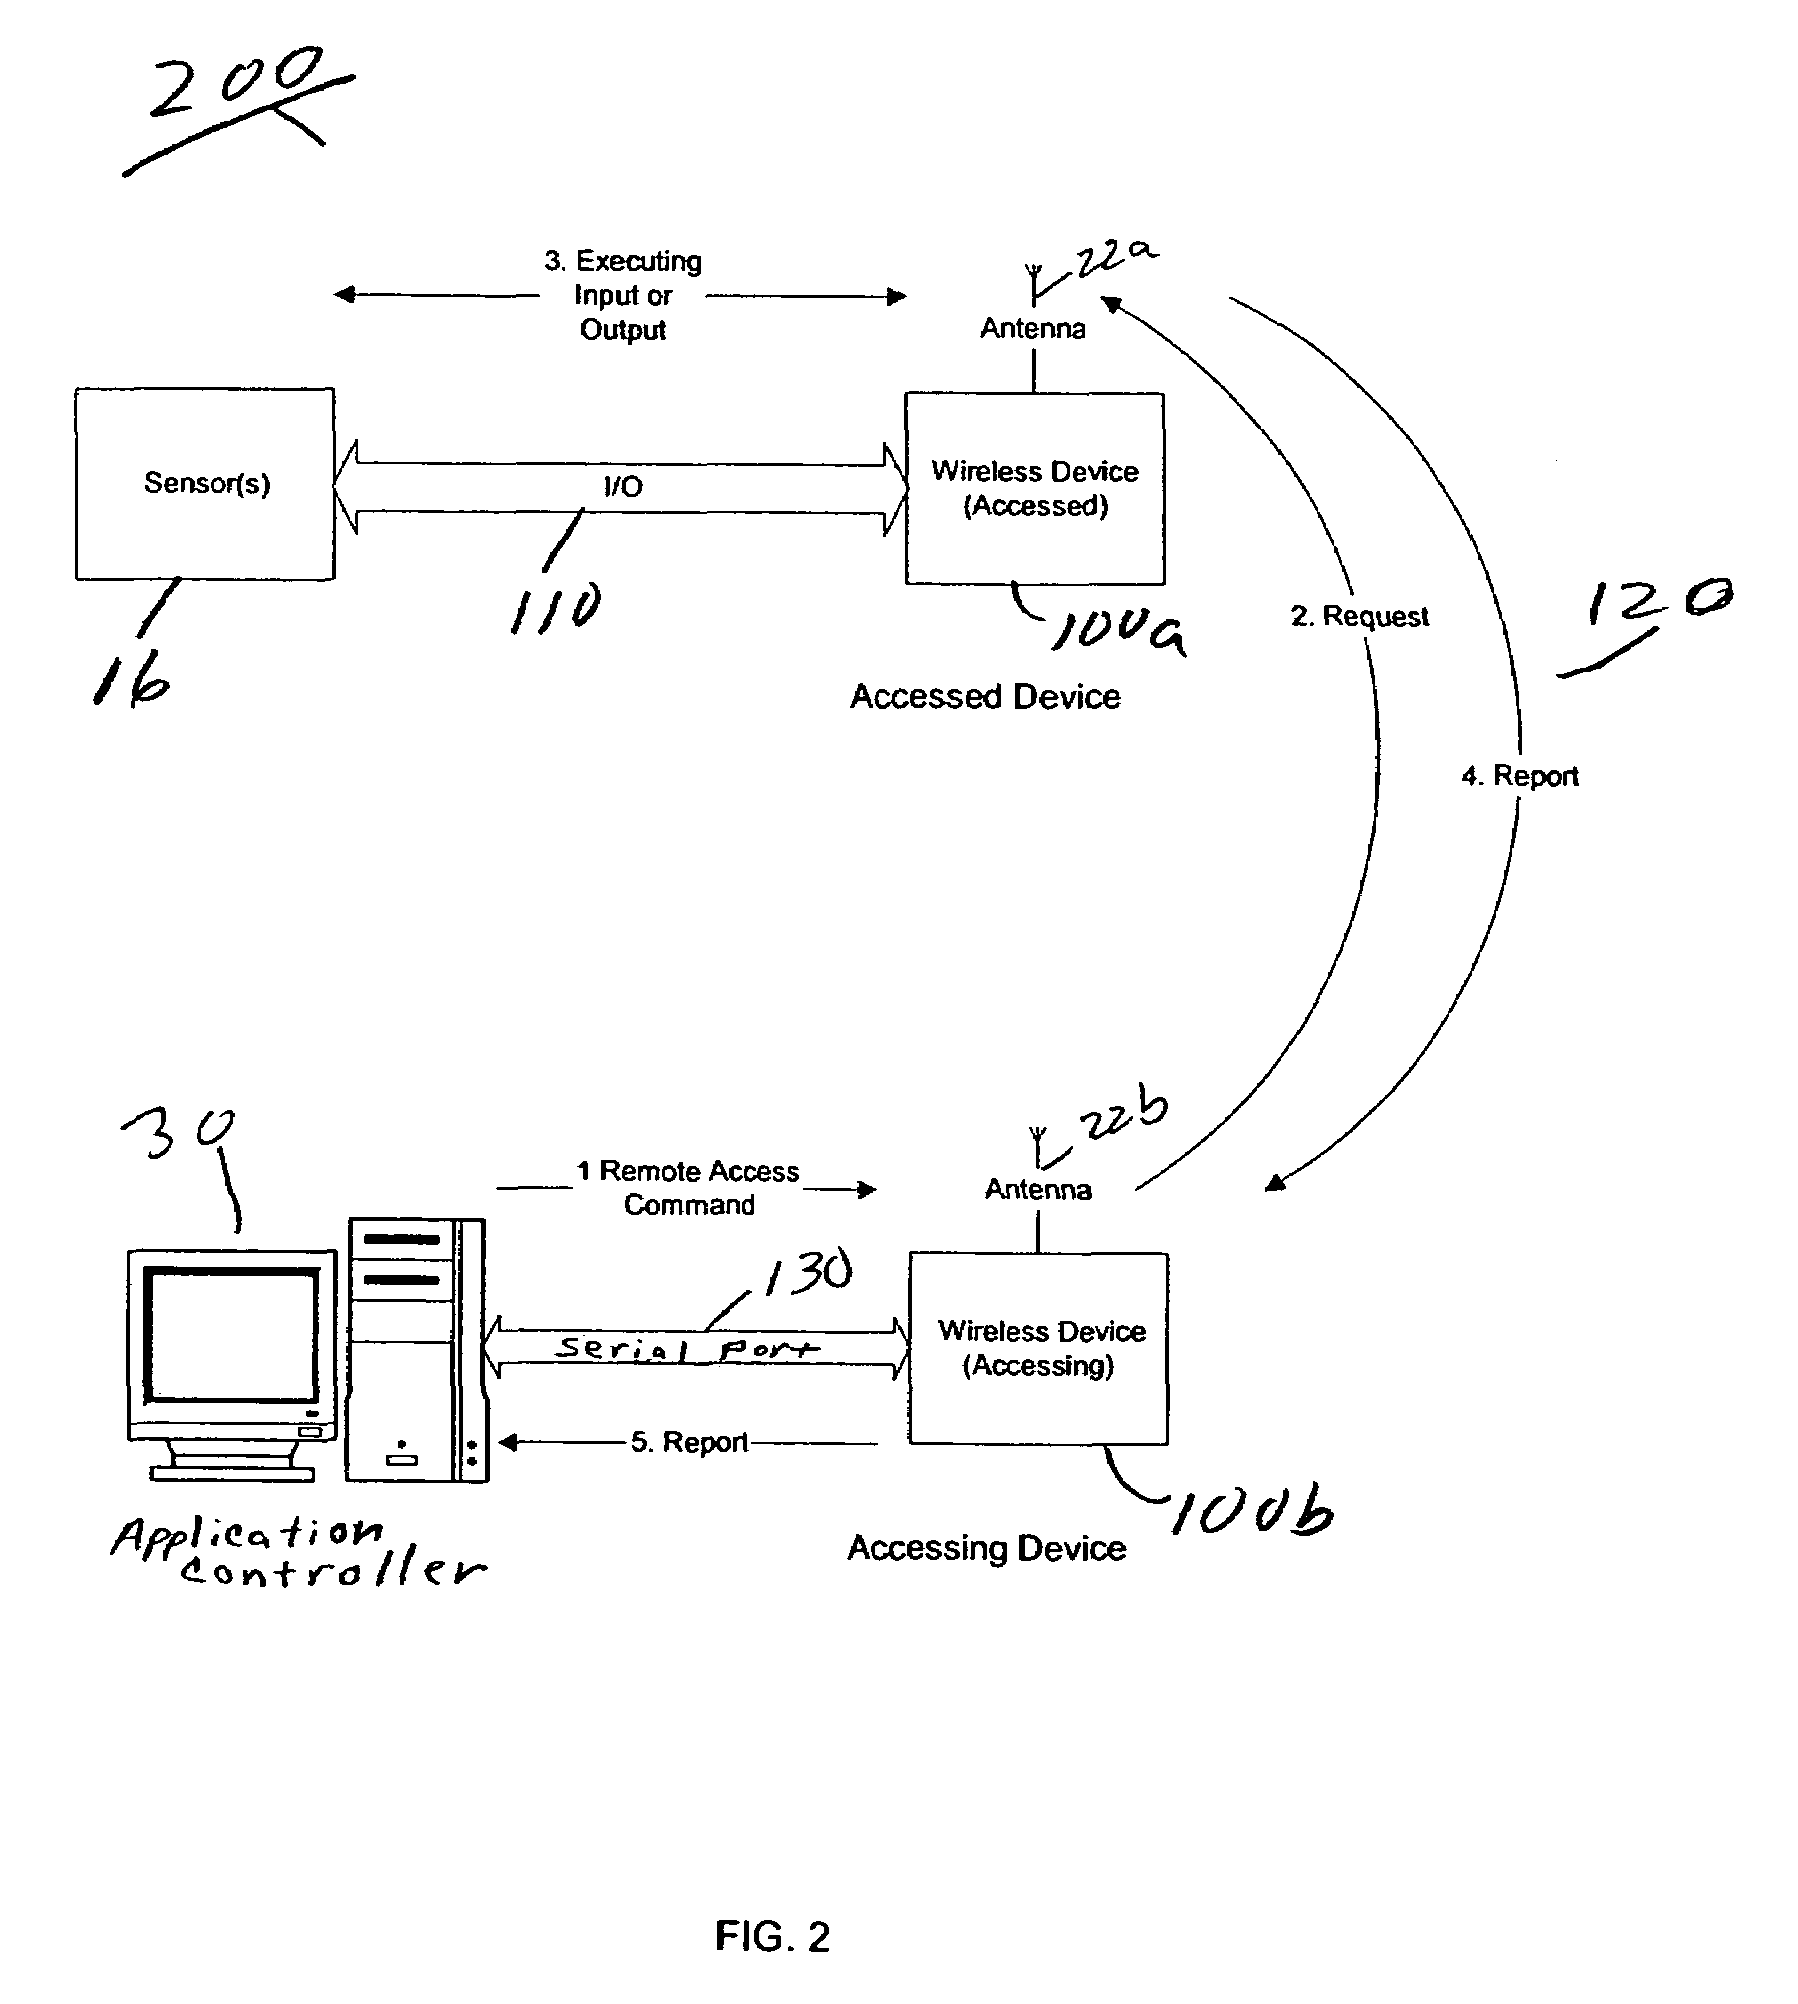 Method and system for remote management of data over a wireless link